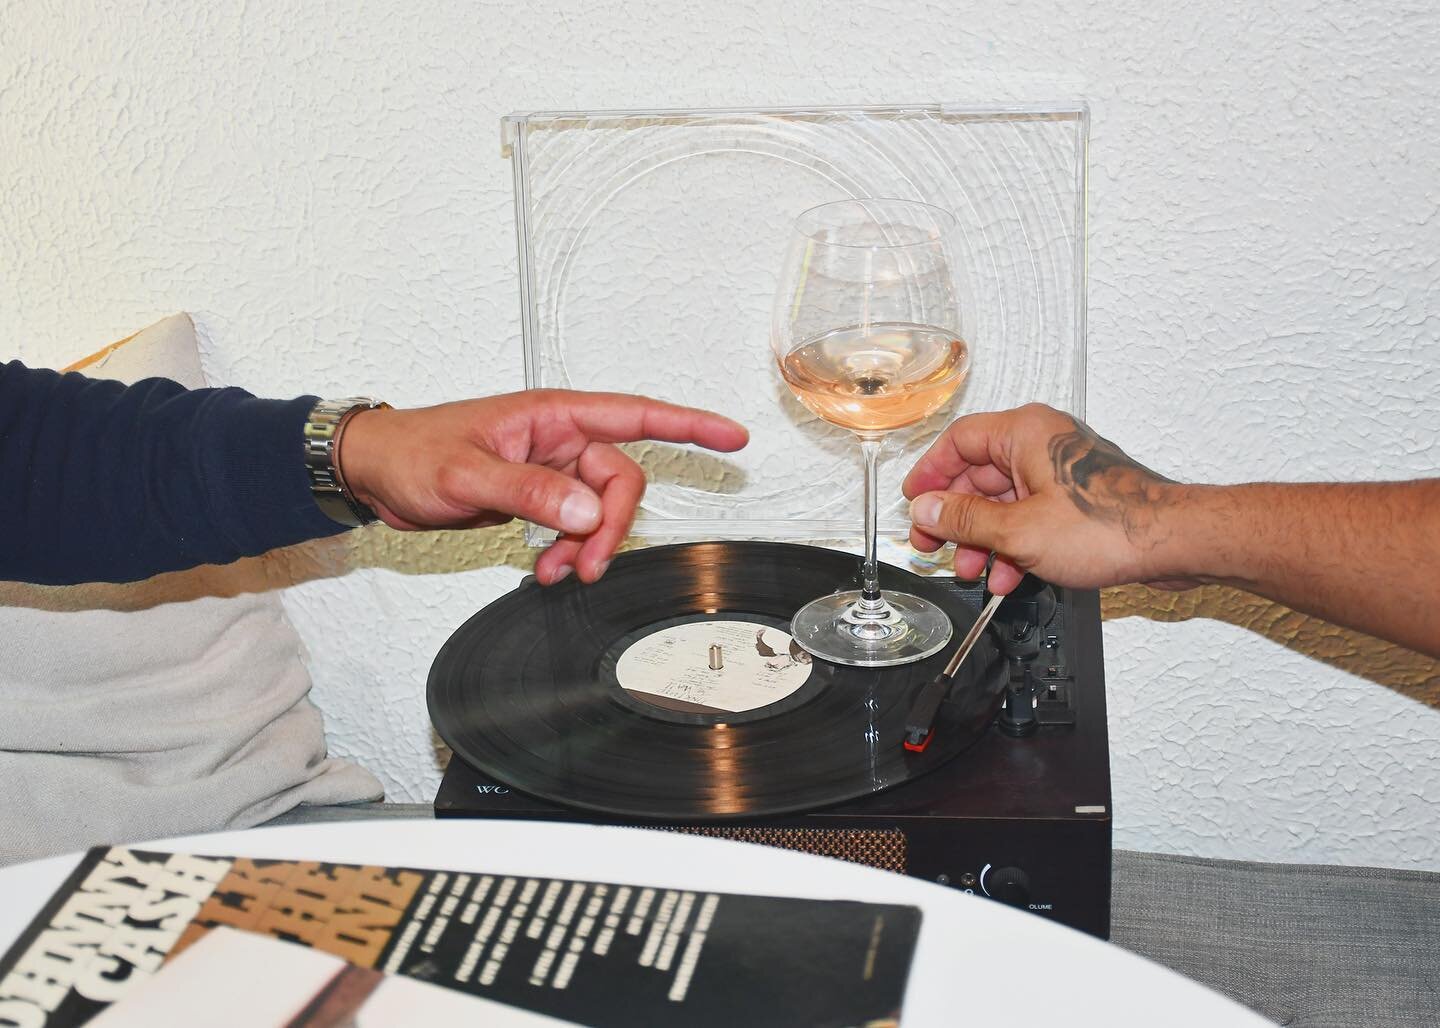 Tuning in to good vibes only for the weekend #goodiewine 
.
.
.
.
.
#winefestival #organicwine #naturalwine #drinkgoodwine #goodwine #wine #ros&eacute; #roseallday #whitewine #cheers #hipsterstyle #records #weekend #dallas #dtx #bishoparts #designdis